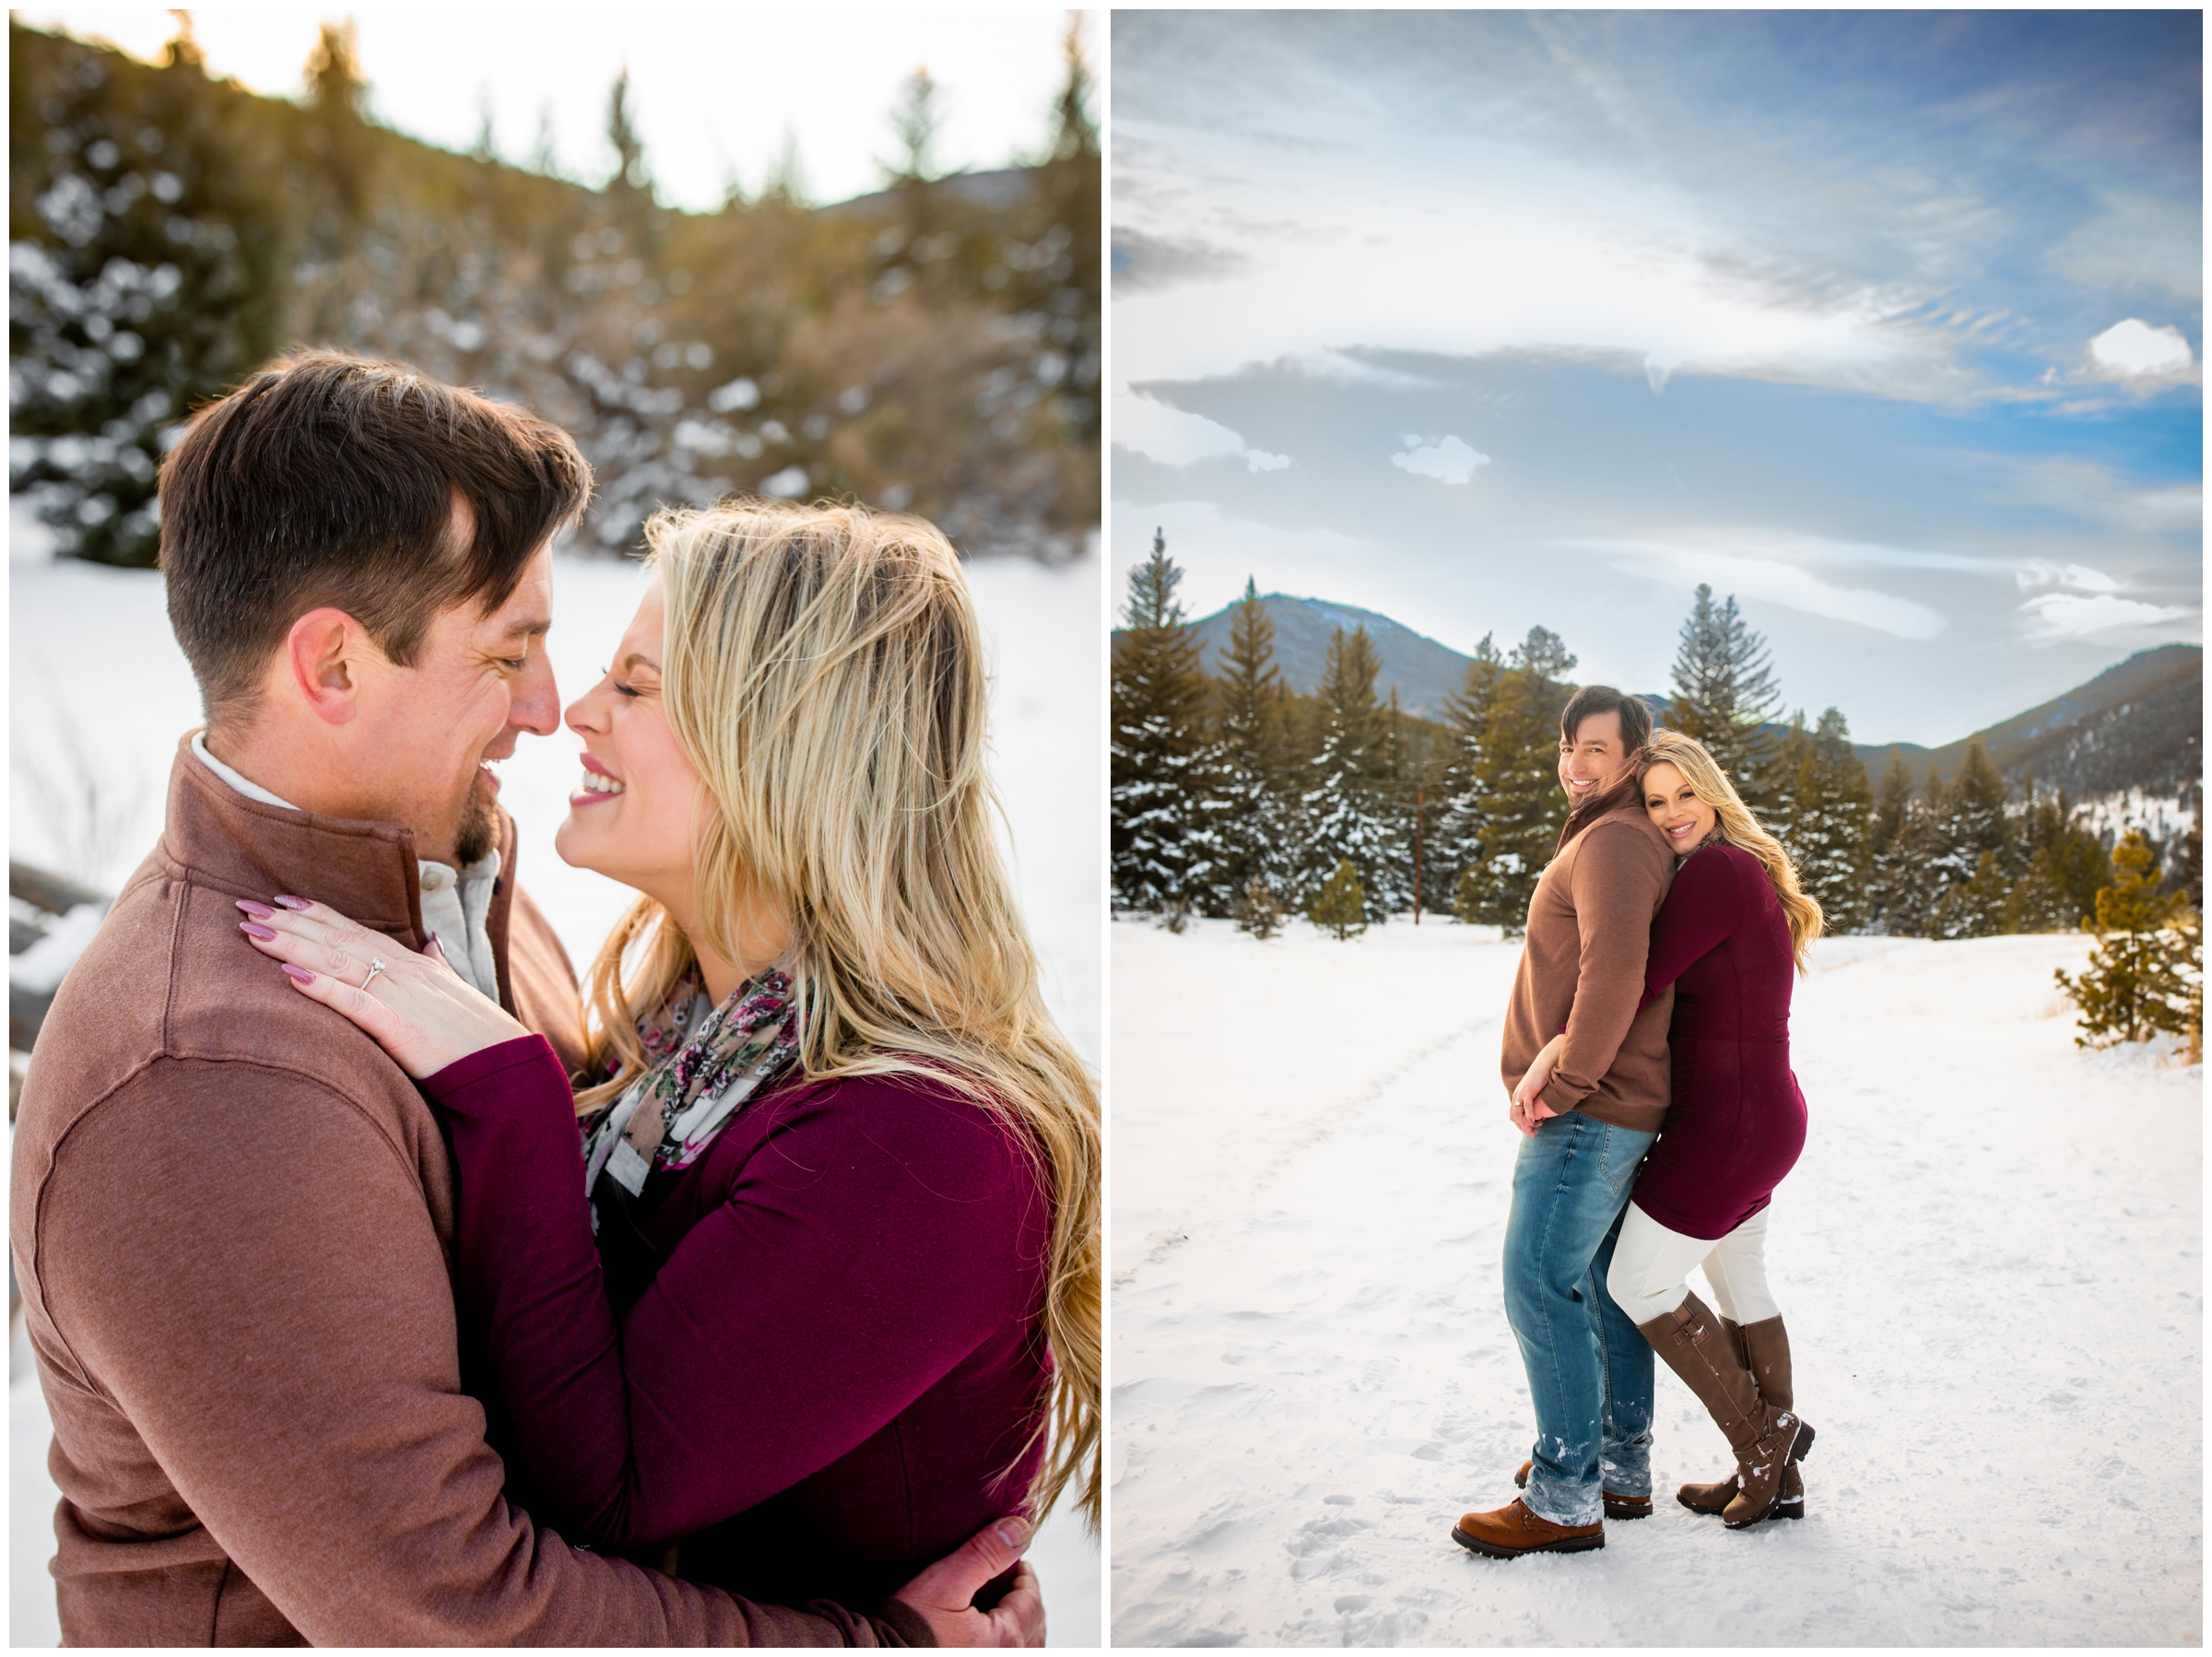 Colorado winter engagement pictures at Frosberg Park and Beaver Brook Watershed by Evergreen photographer Plum Pretty Photography